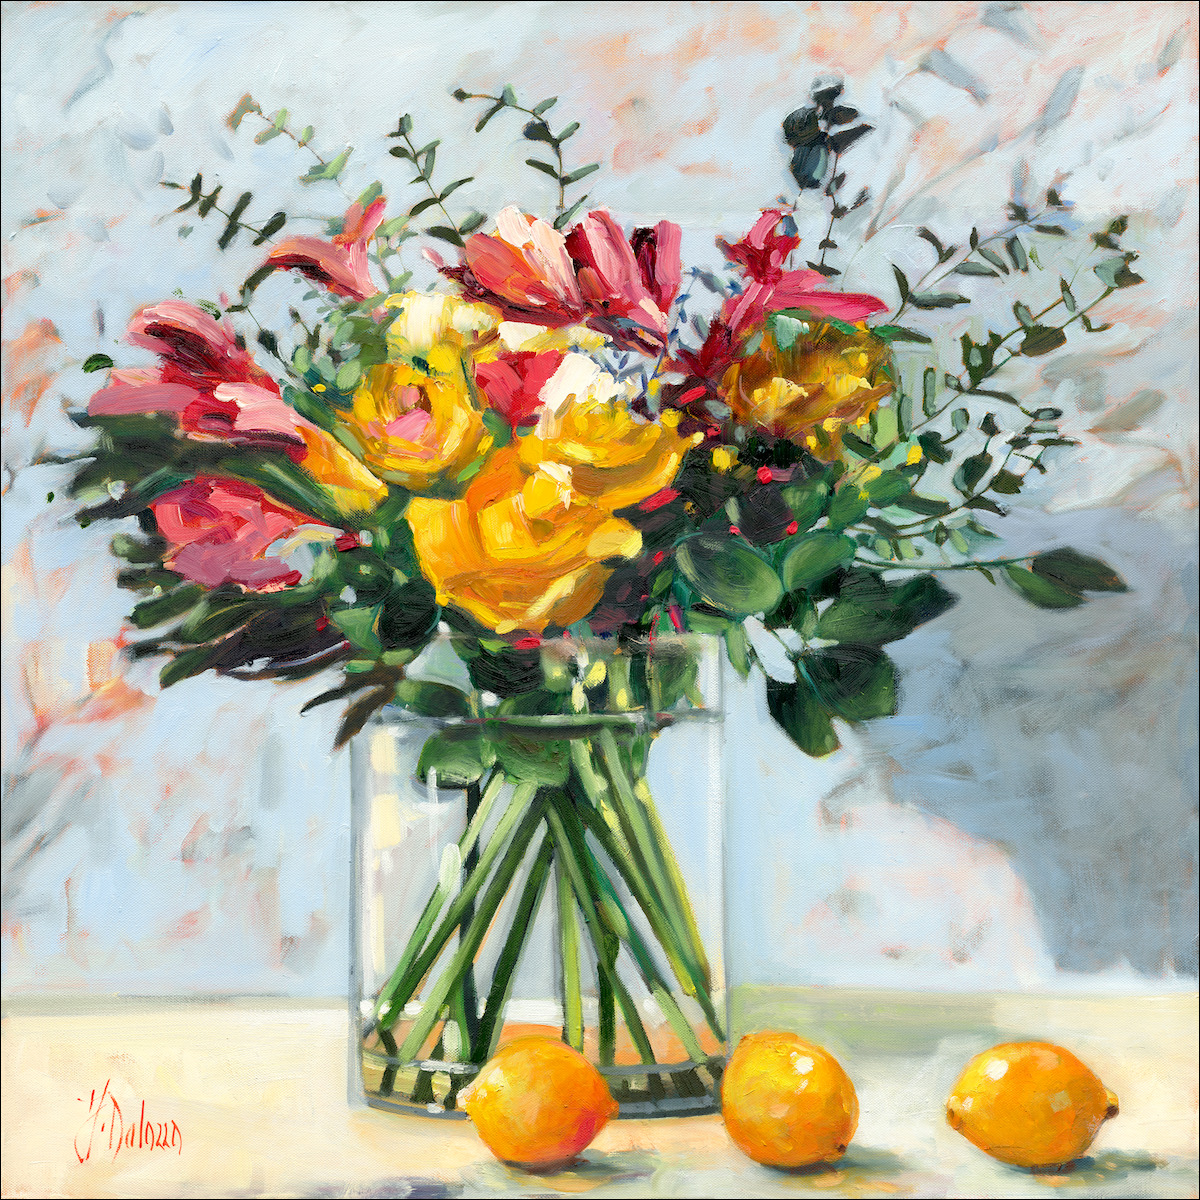 Floral Still Life "Flowers for Every Occasion" Original Artwork by Judith Dalozzo